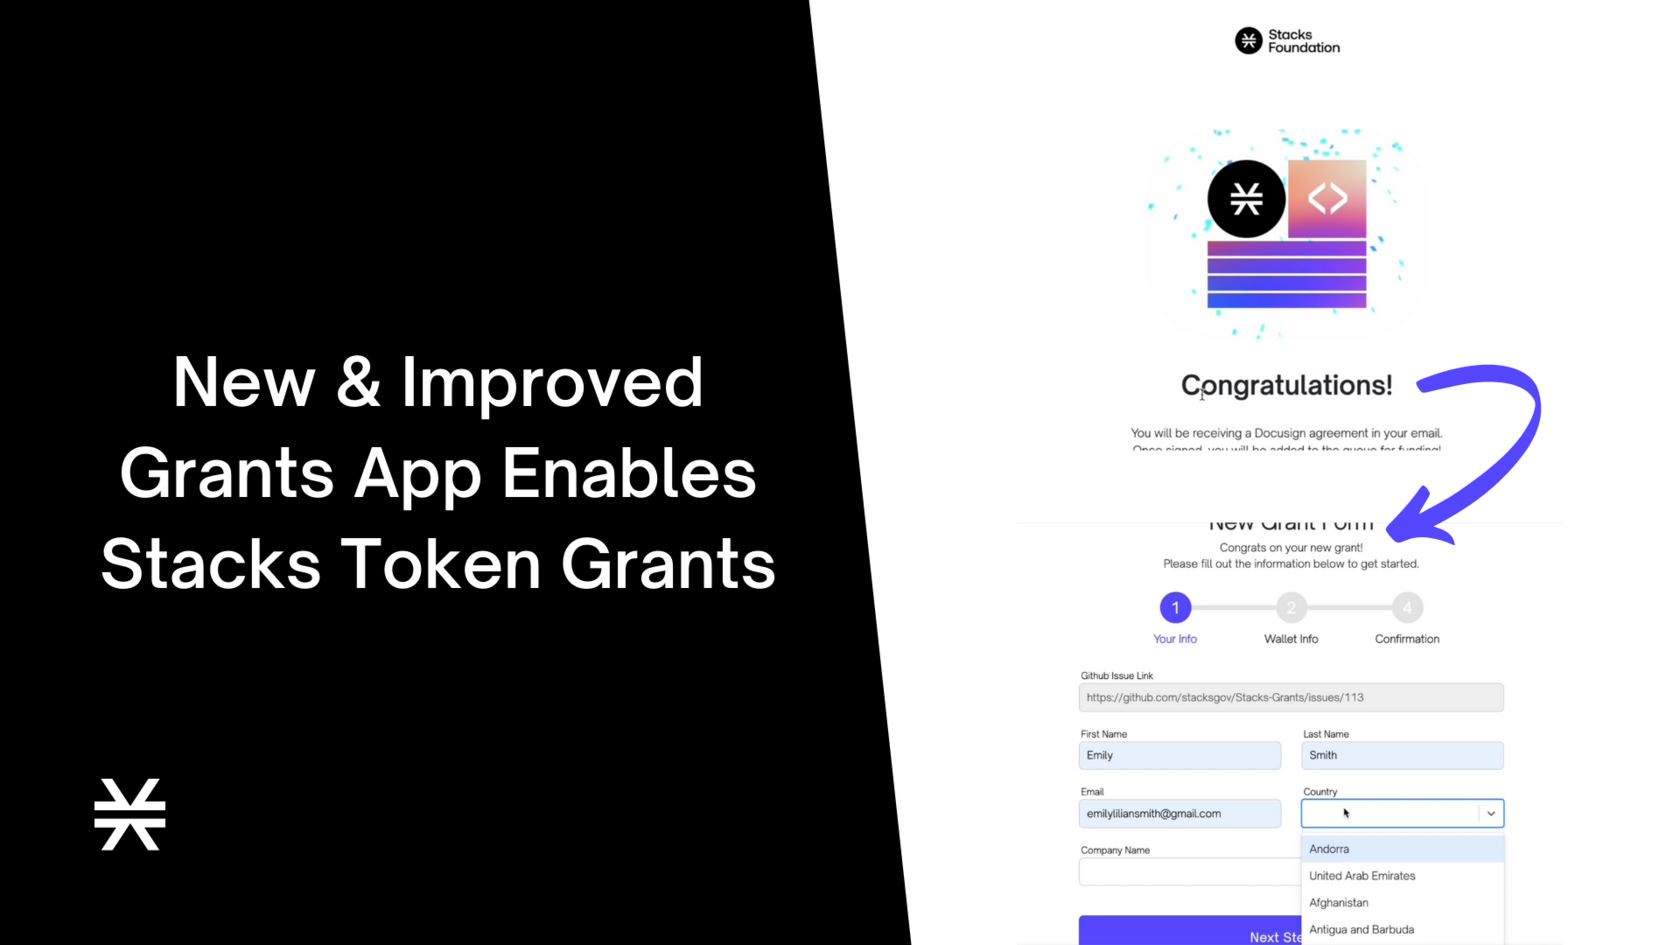 Introducing the new Stacks Grants App